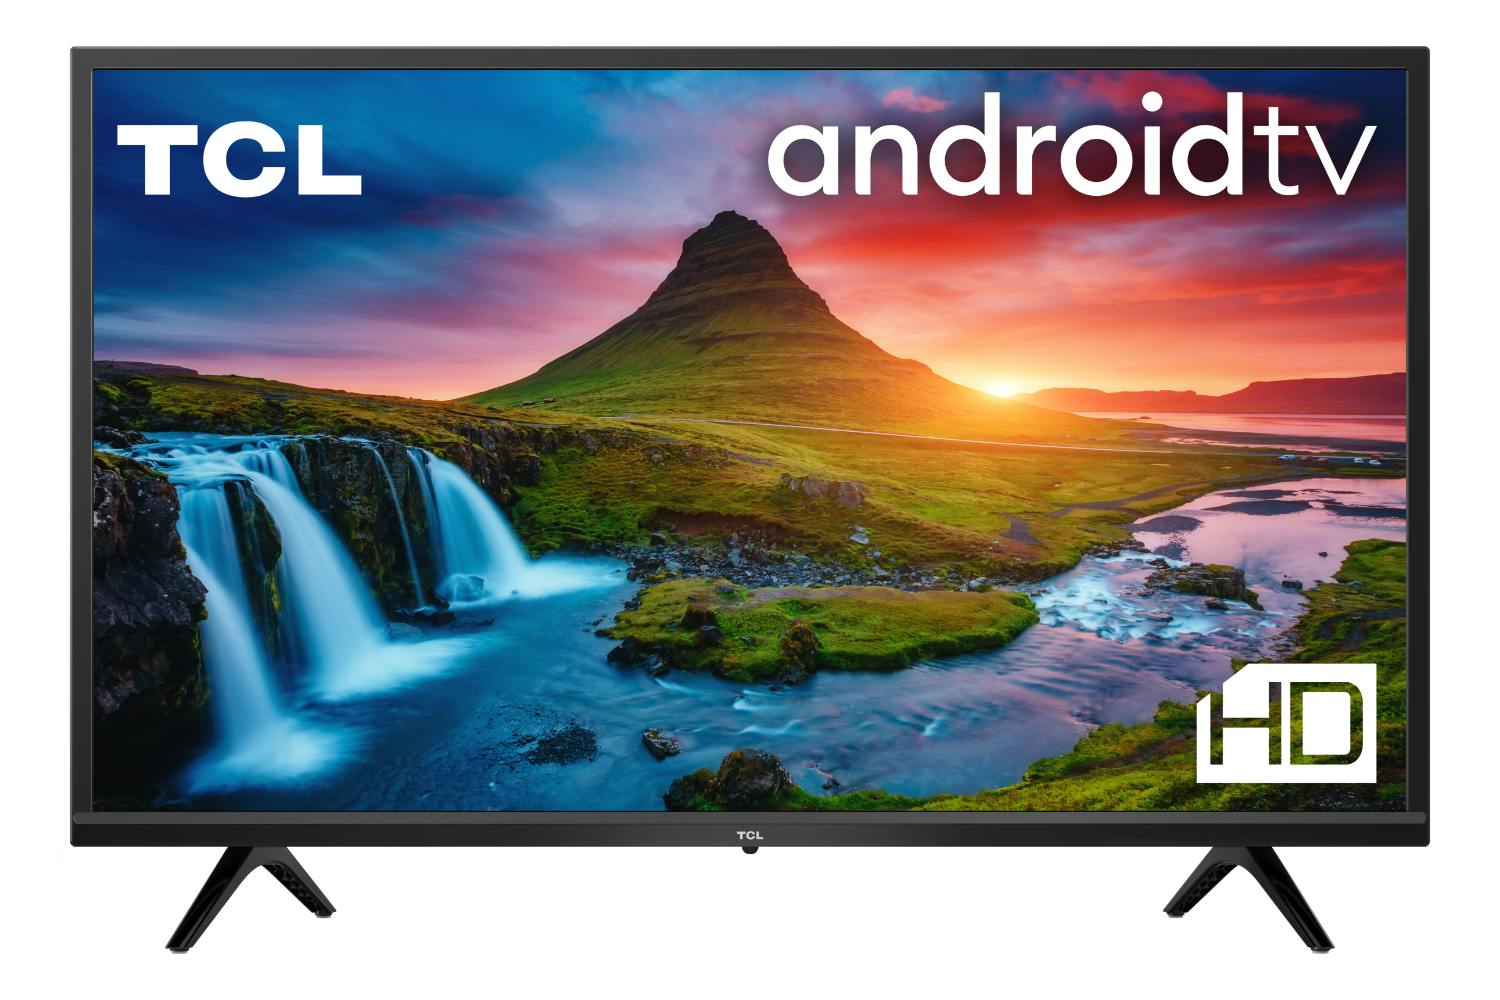 TCL 32" HD Ready HDR Android TV | 32S5200K